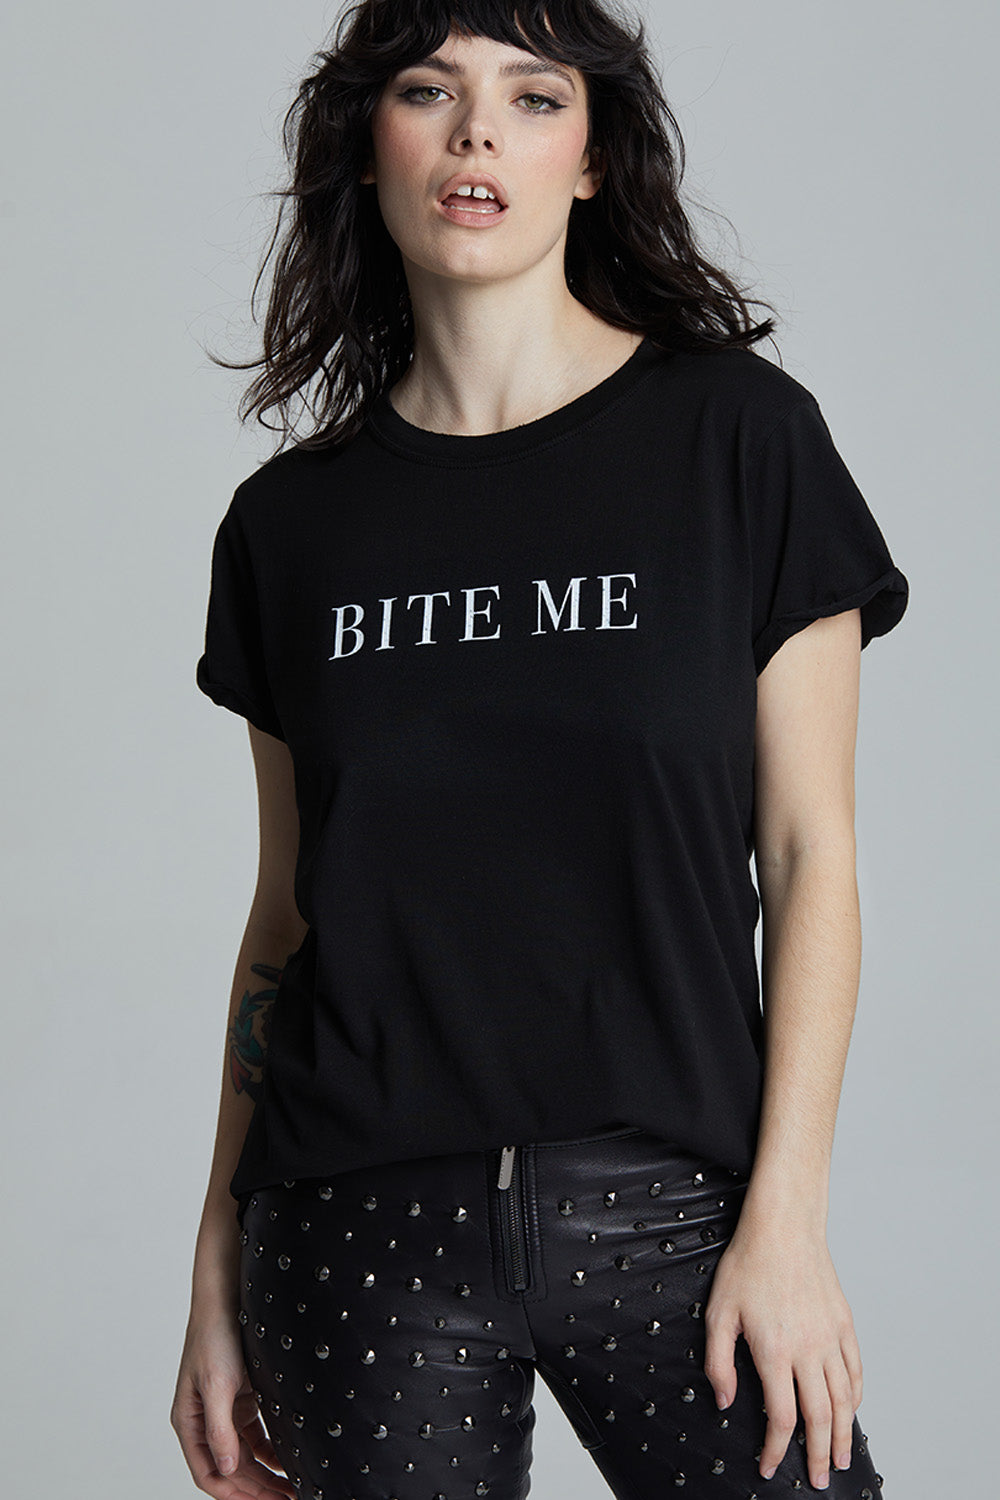 Bite Me Black Fitted Tee